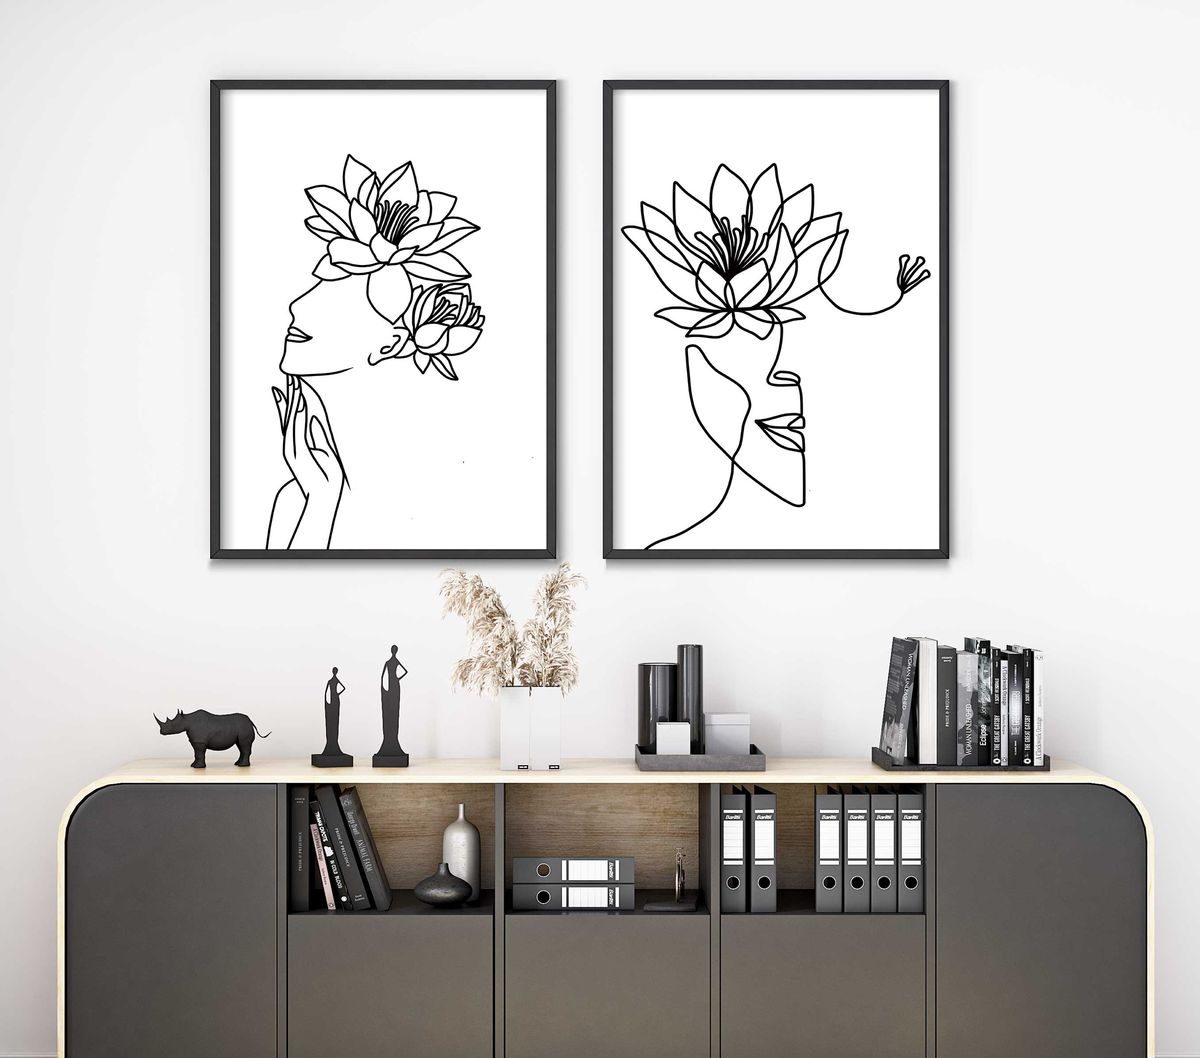 Line Art Wall Decor Faces with Lotus Flowers A3 - Unframed